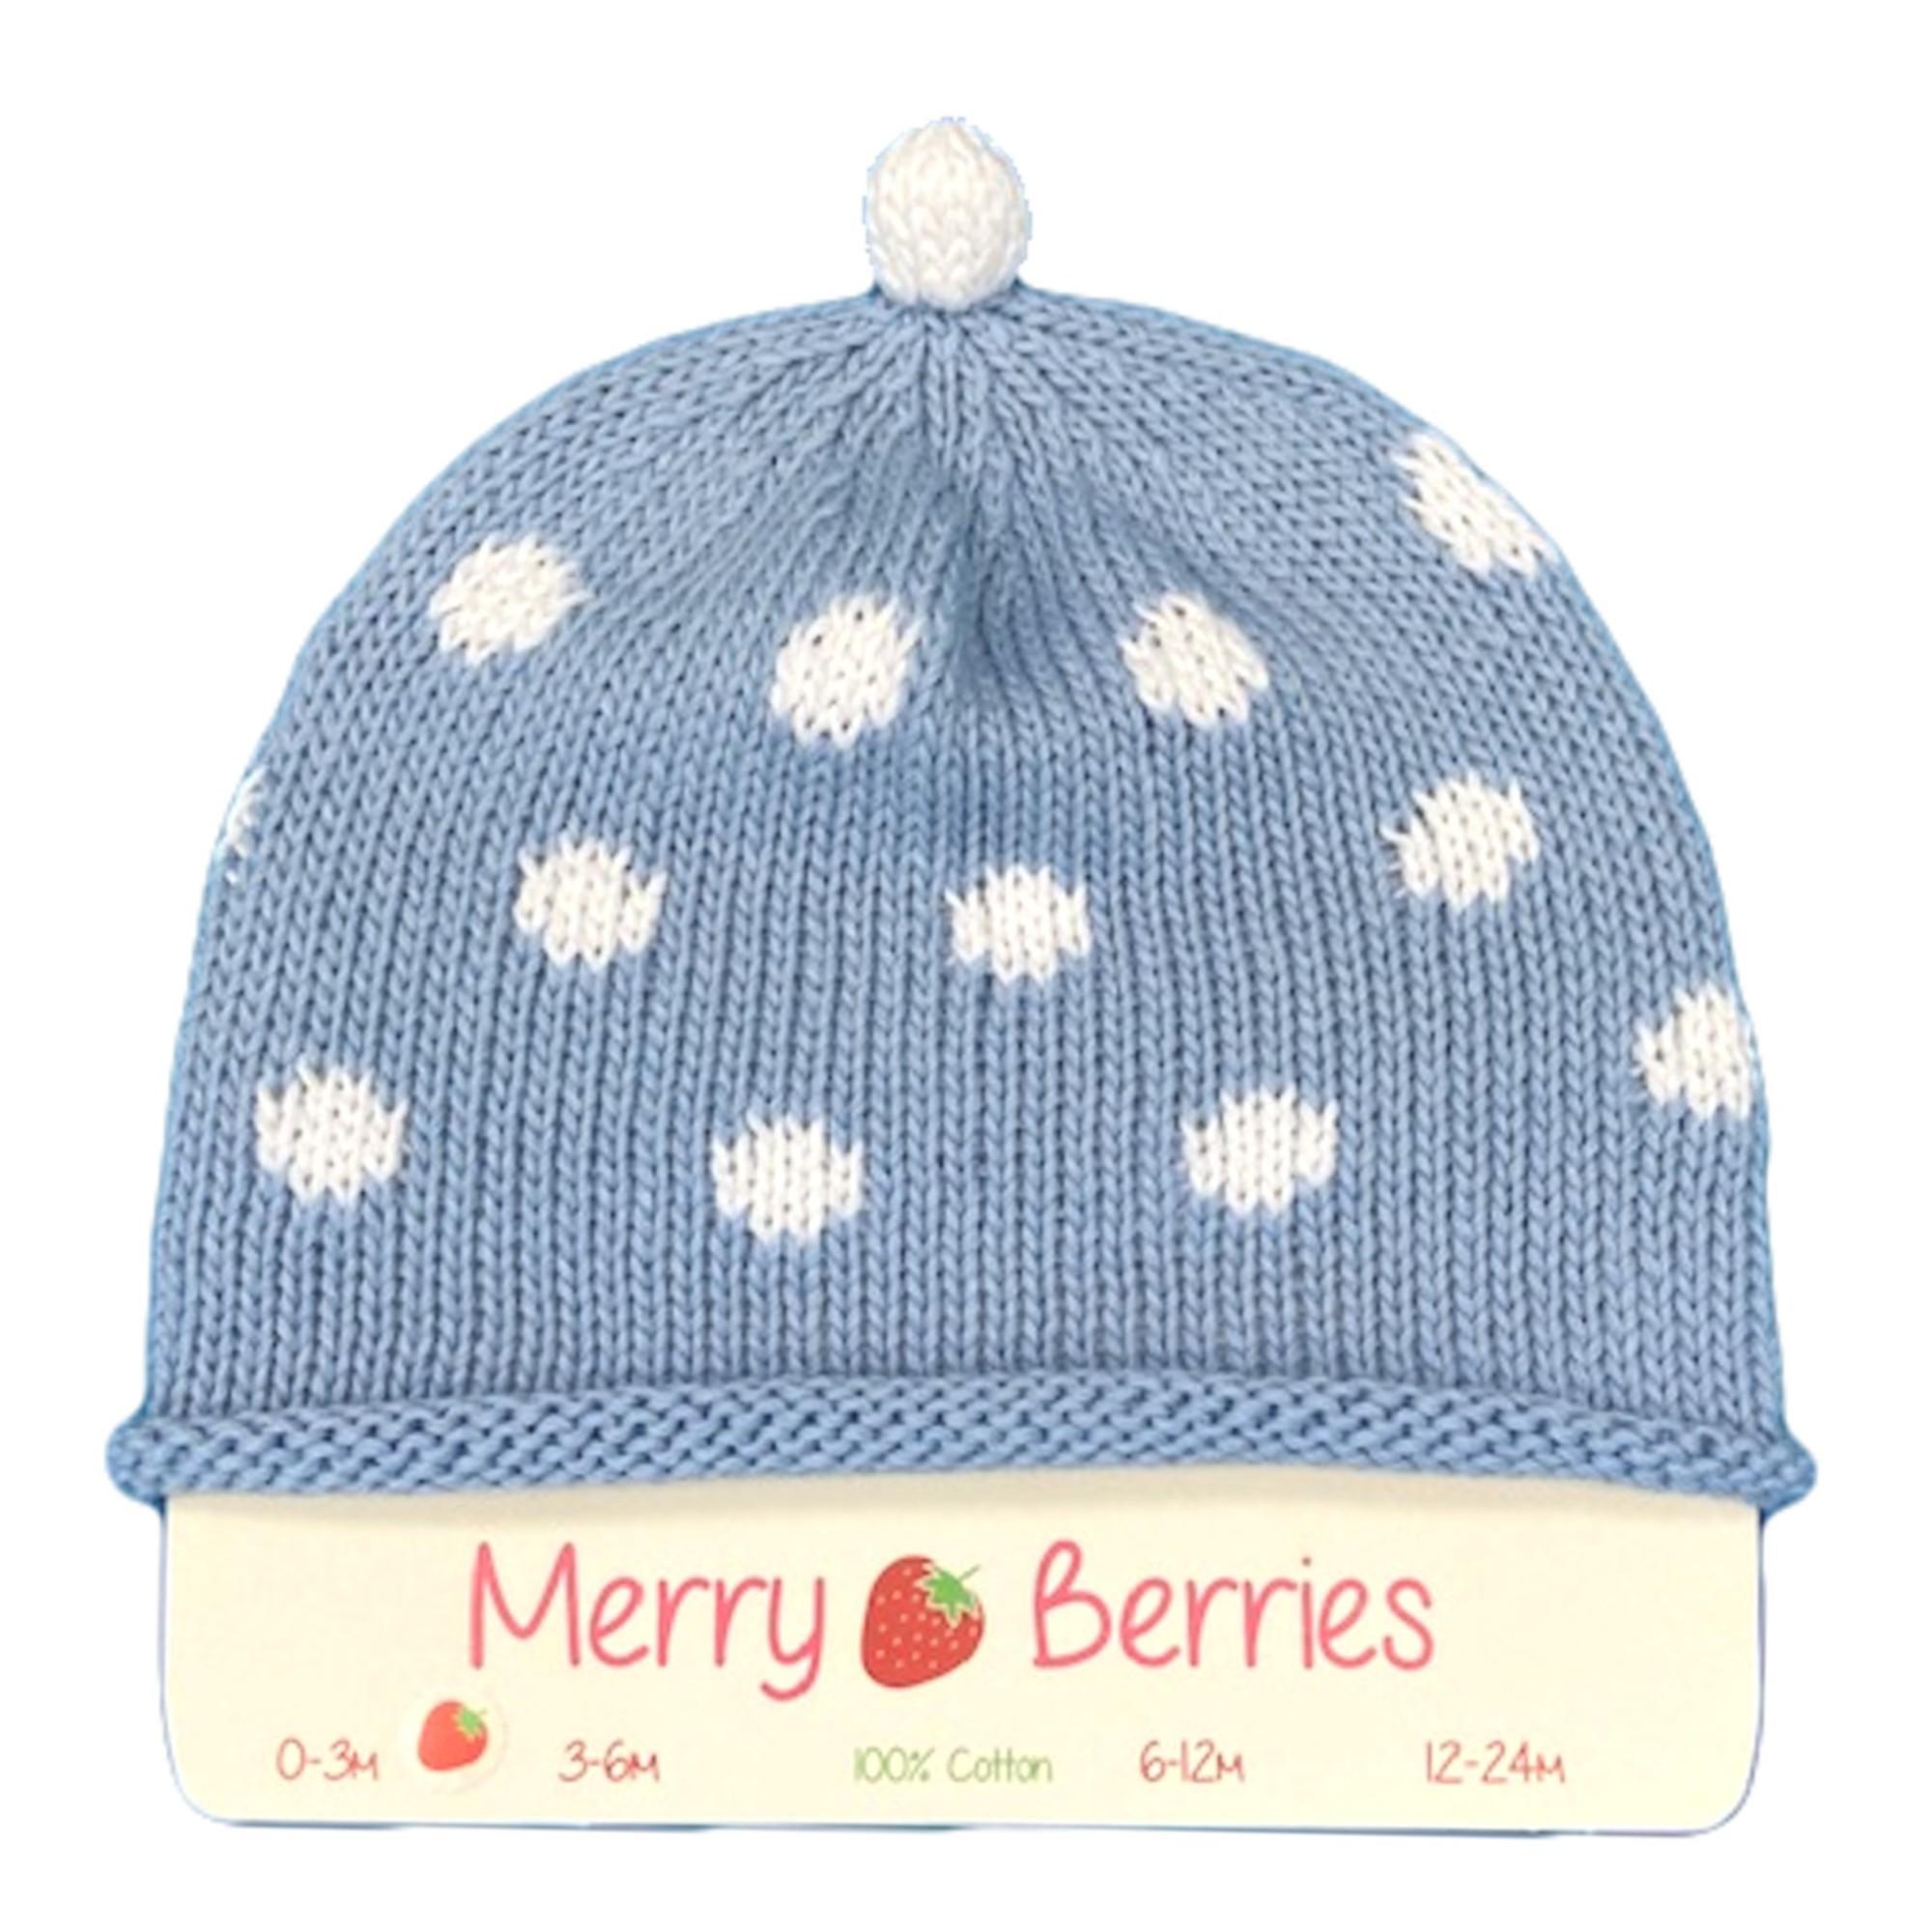 Merry Berries- Sky white spot Knitted Baby Hat- 0-24 Months- Cotton